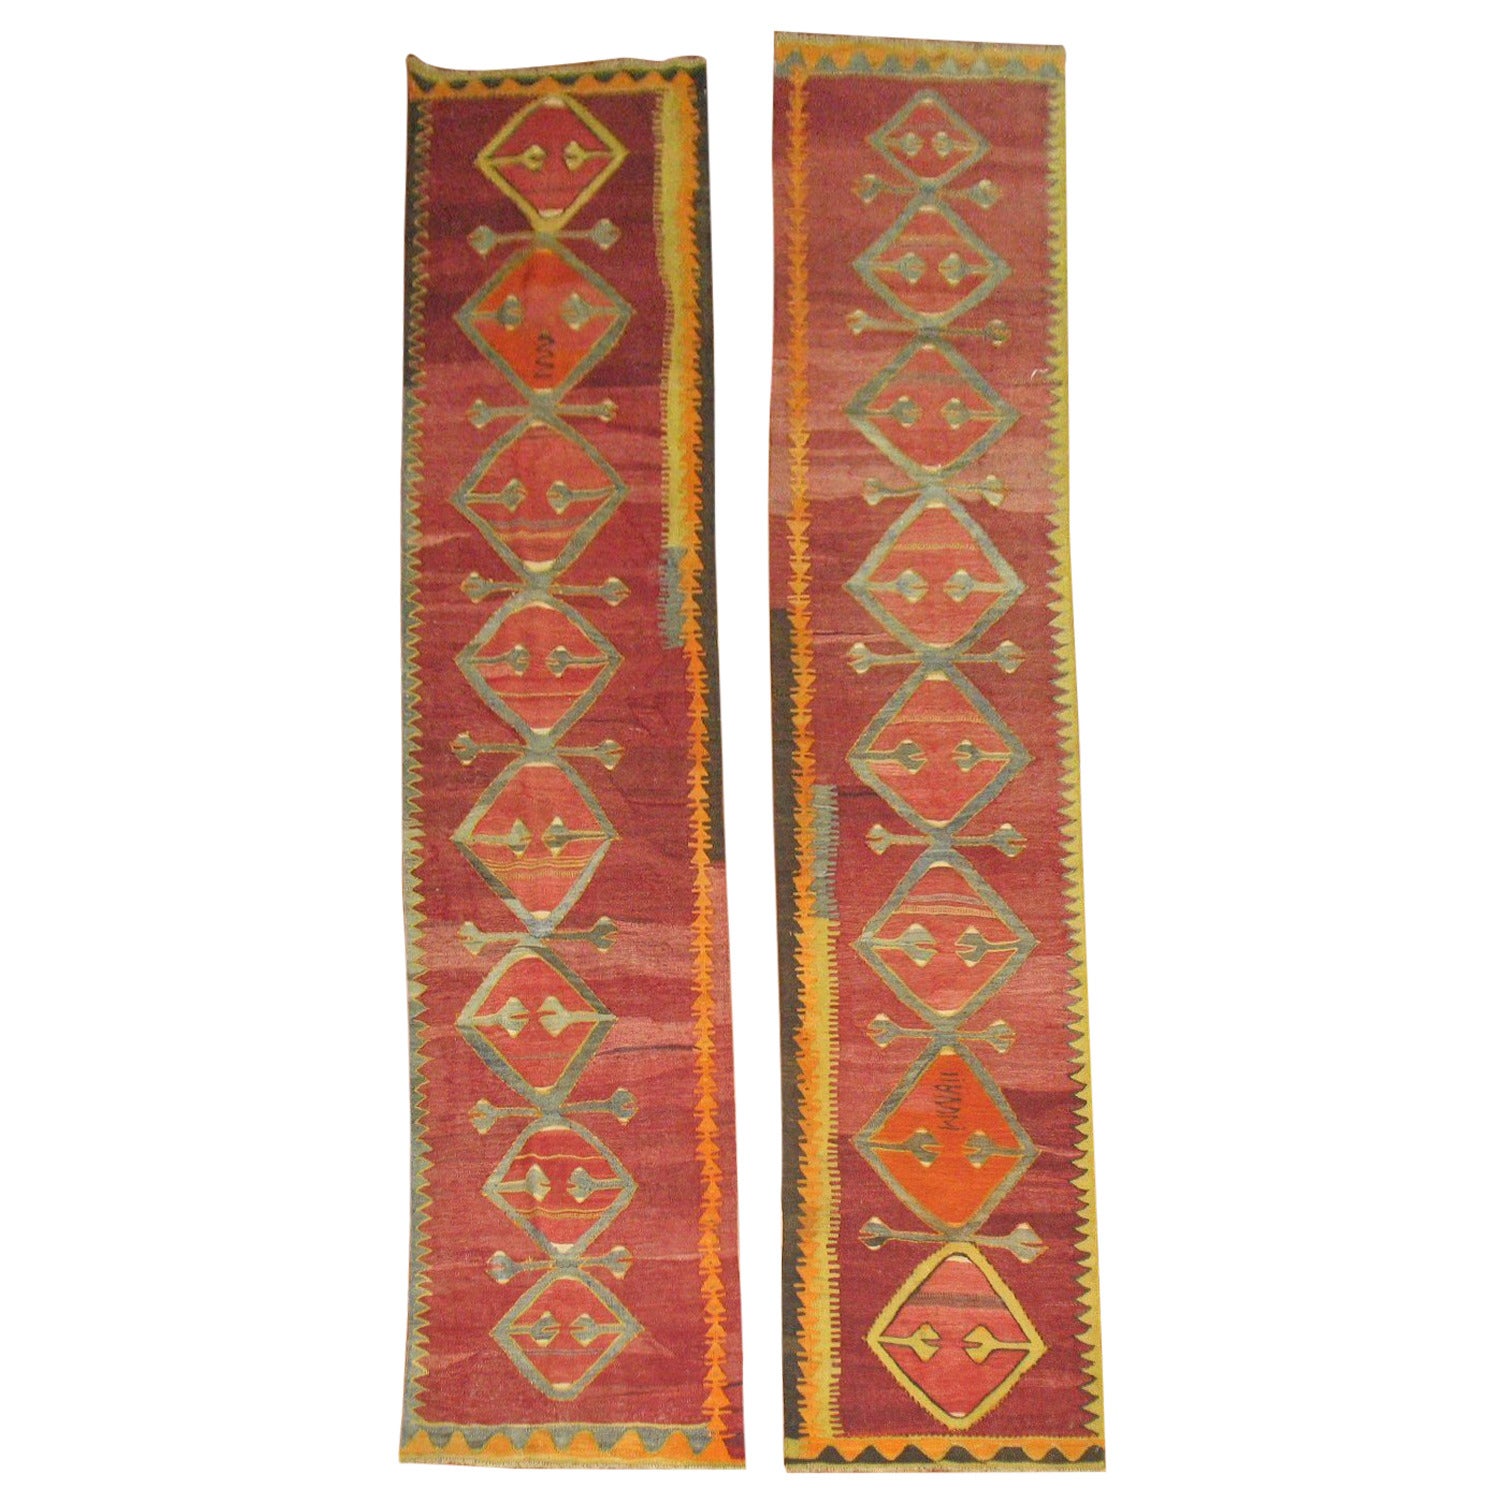 Set of Kilim Runners Woven in Turkey